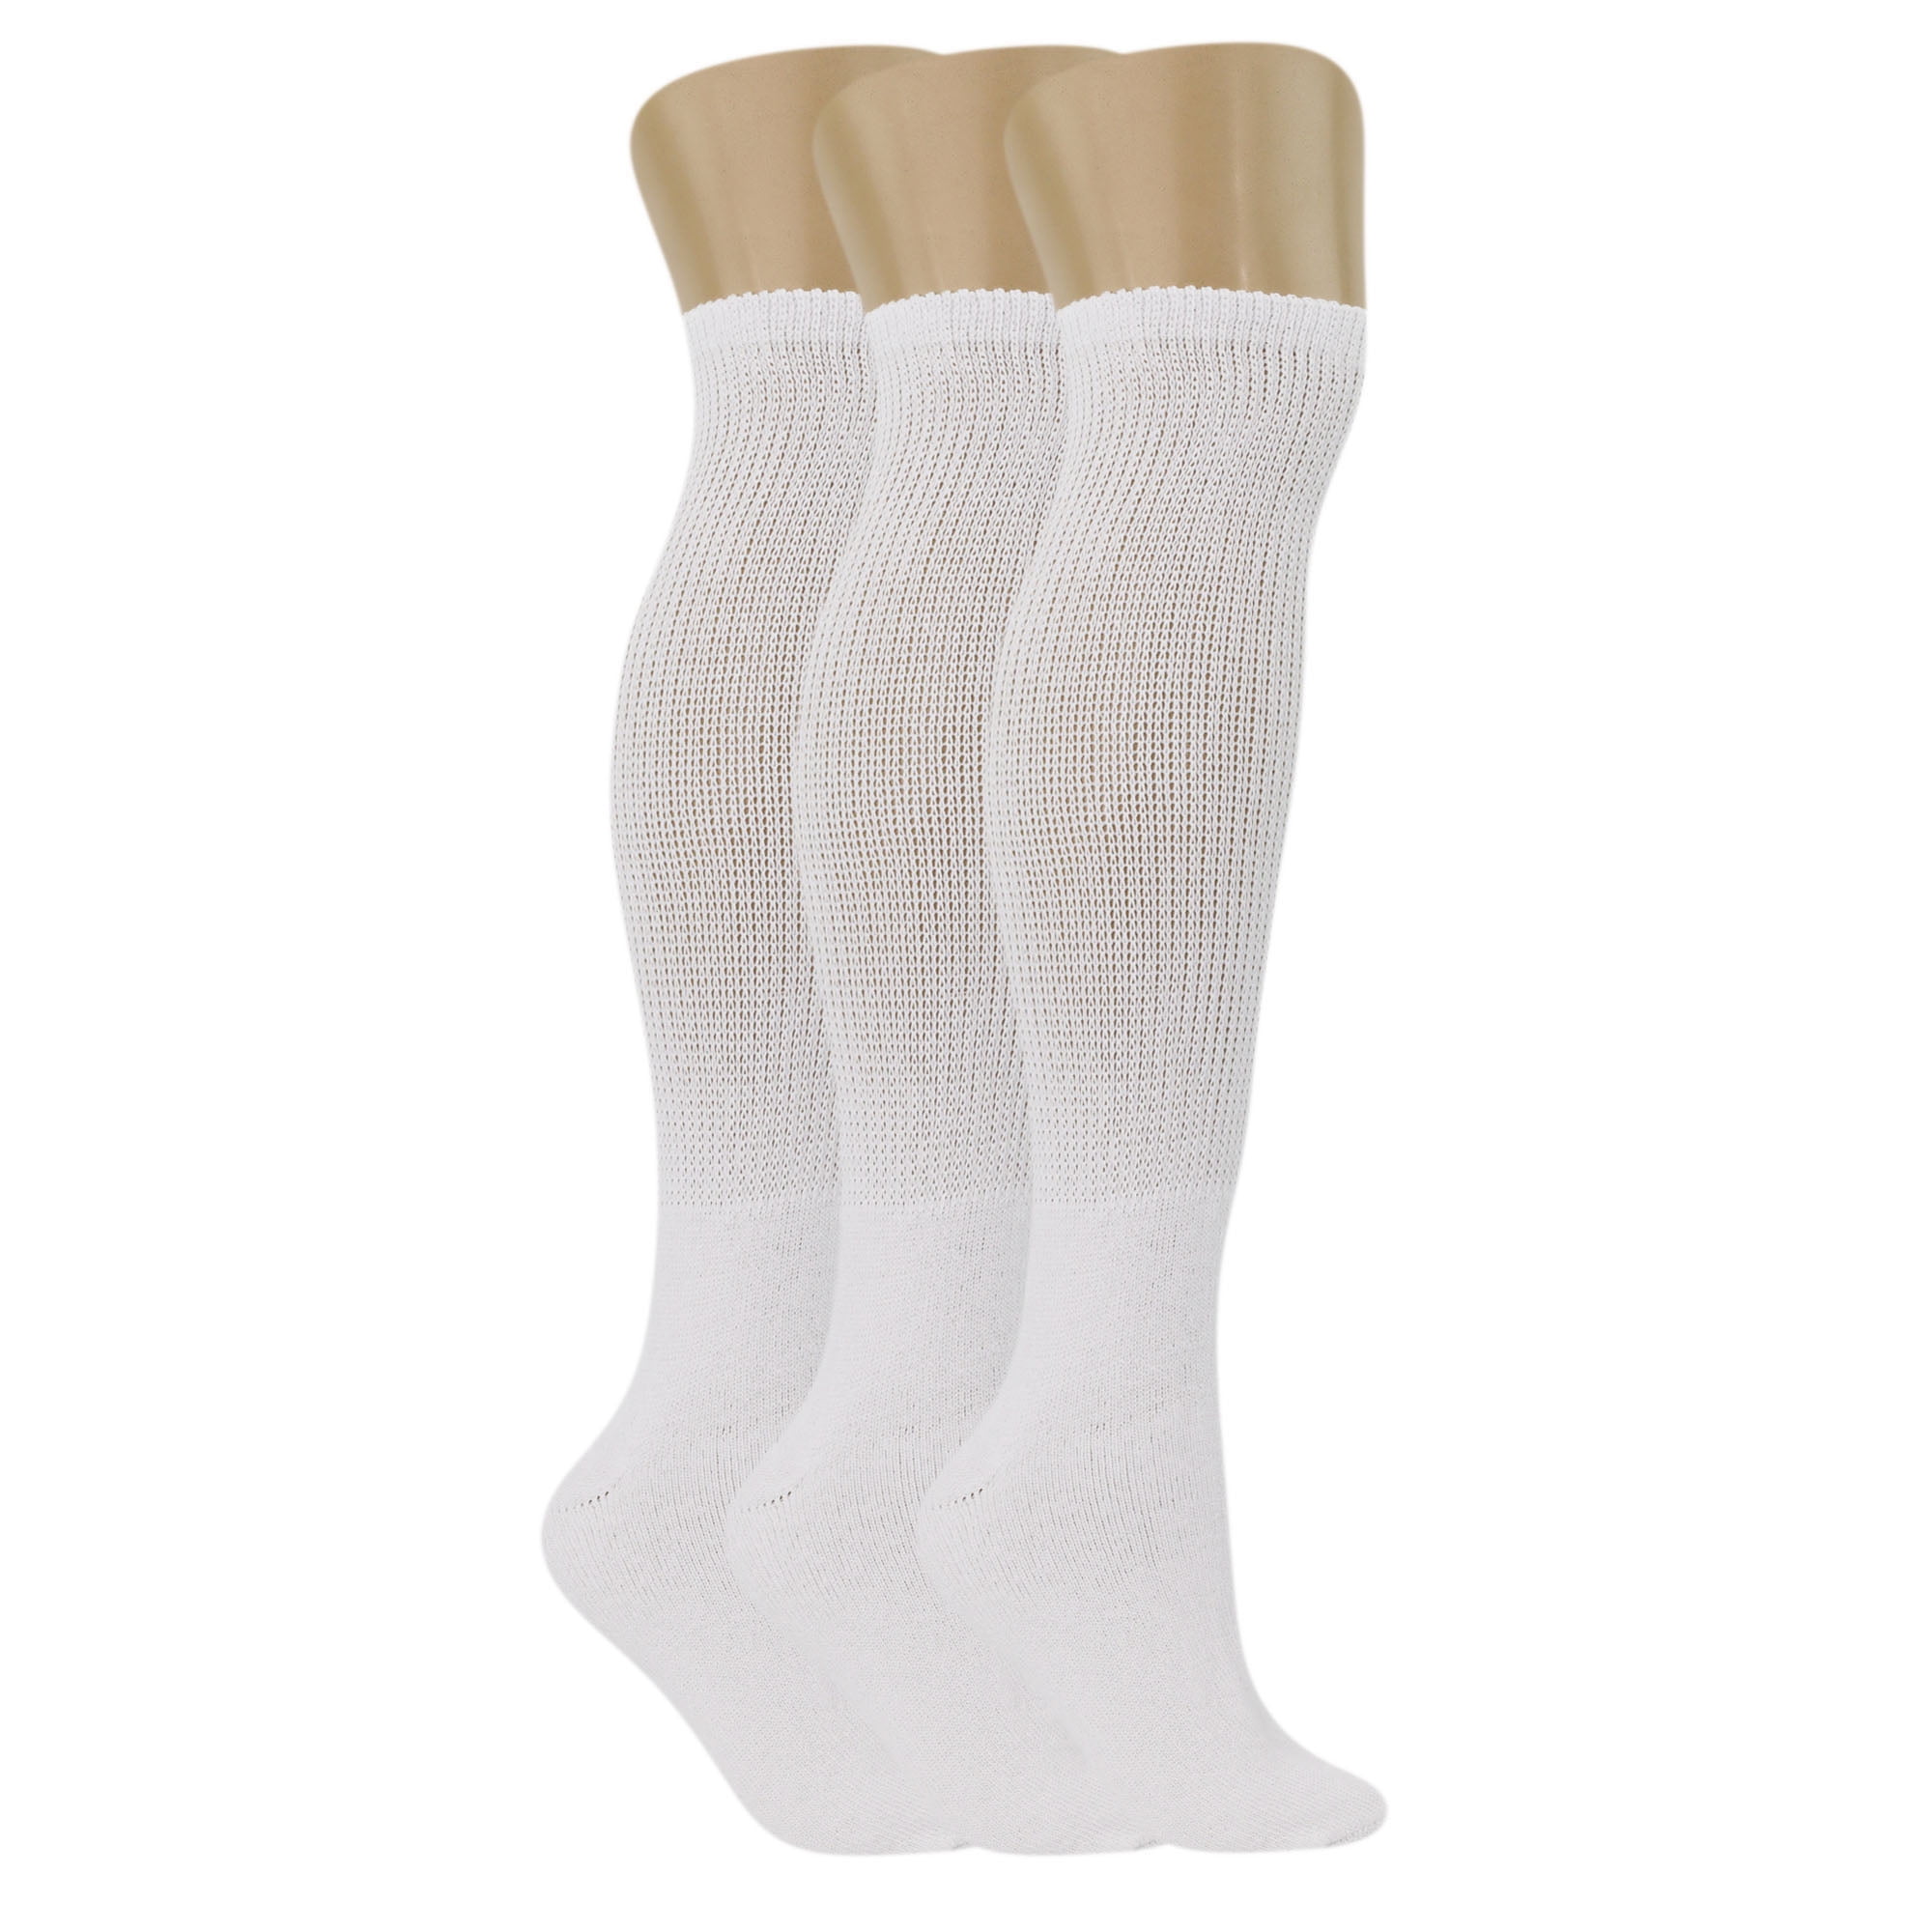 Diabetic Over The Calf Socks for Men and Women 3 Pairs White Size 13-15 ...